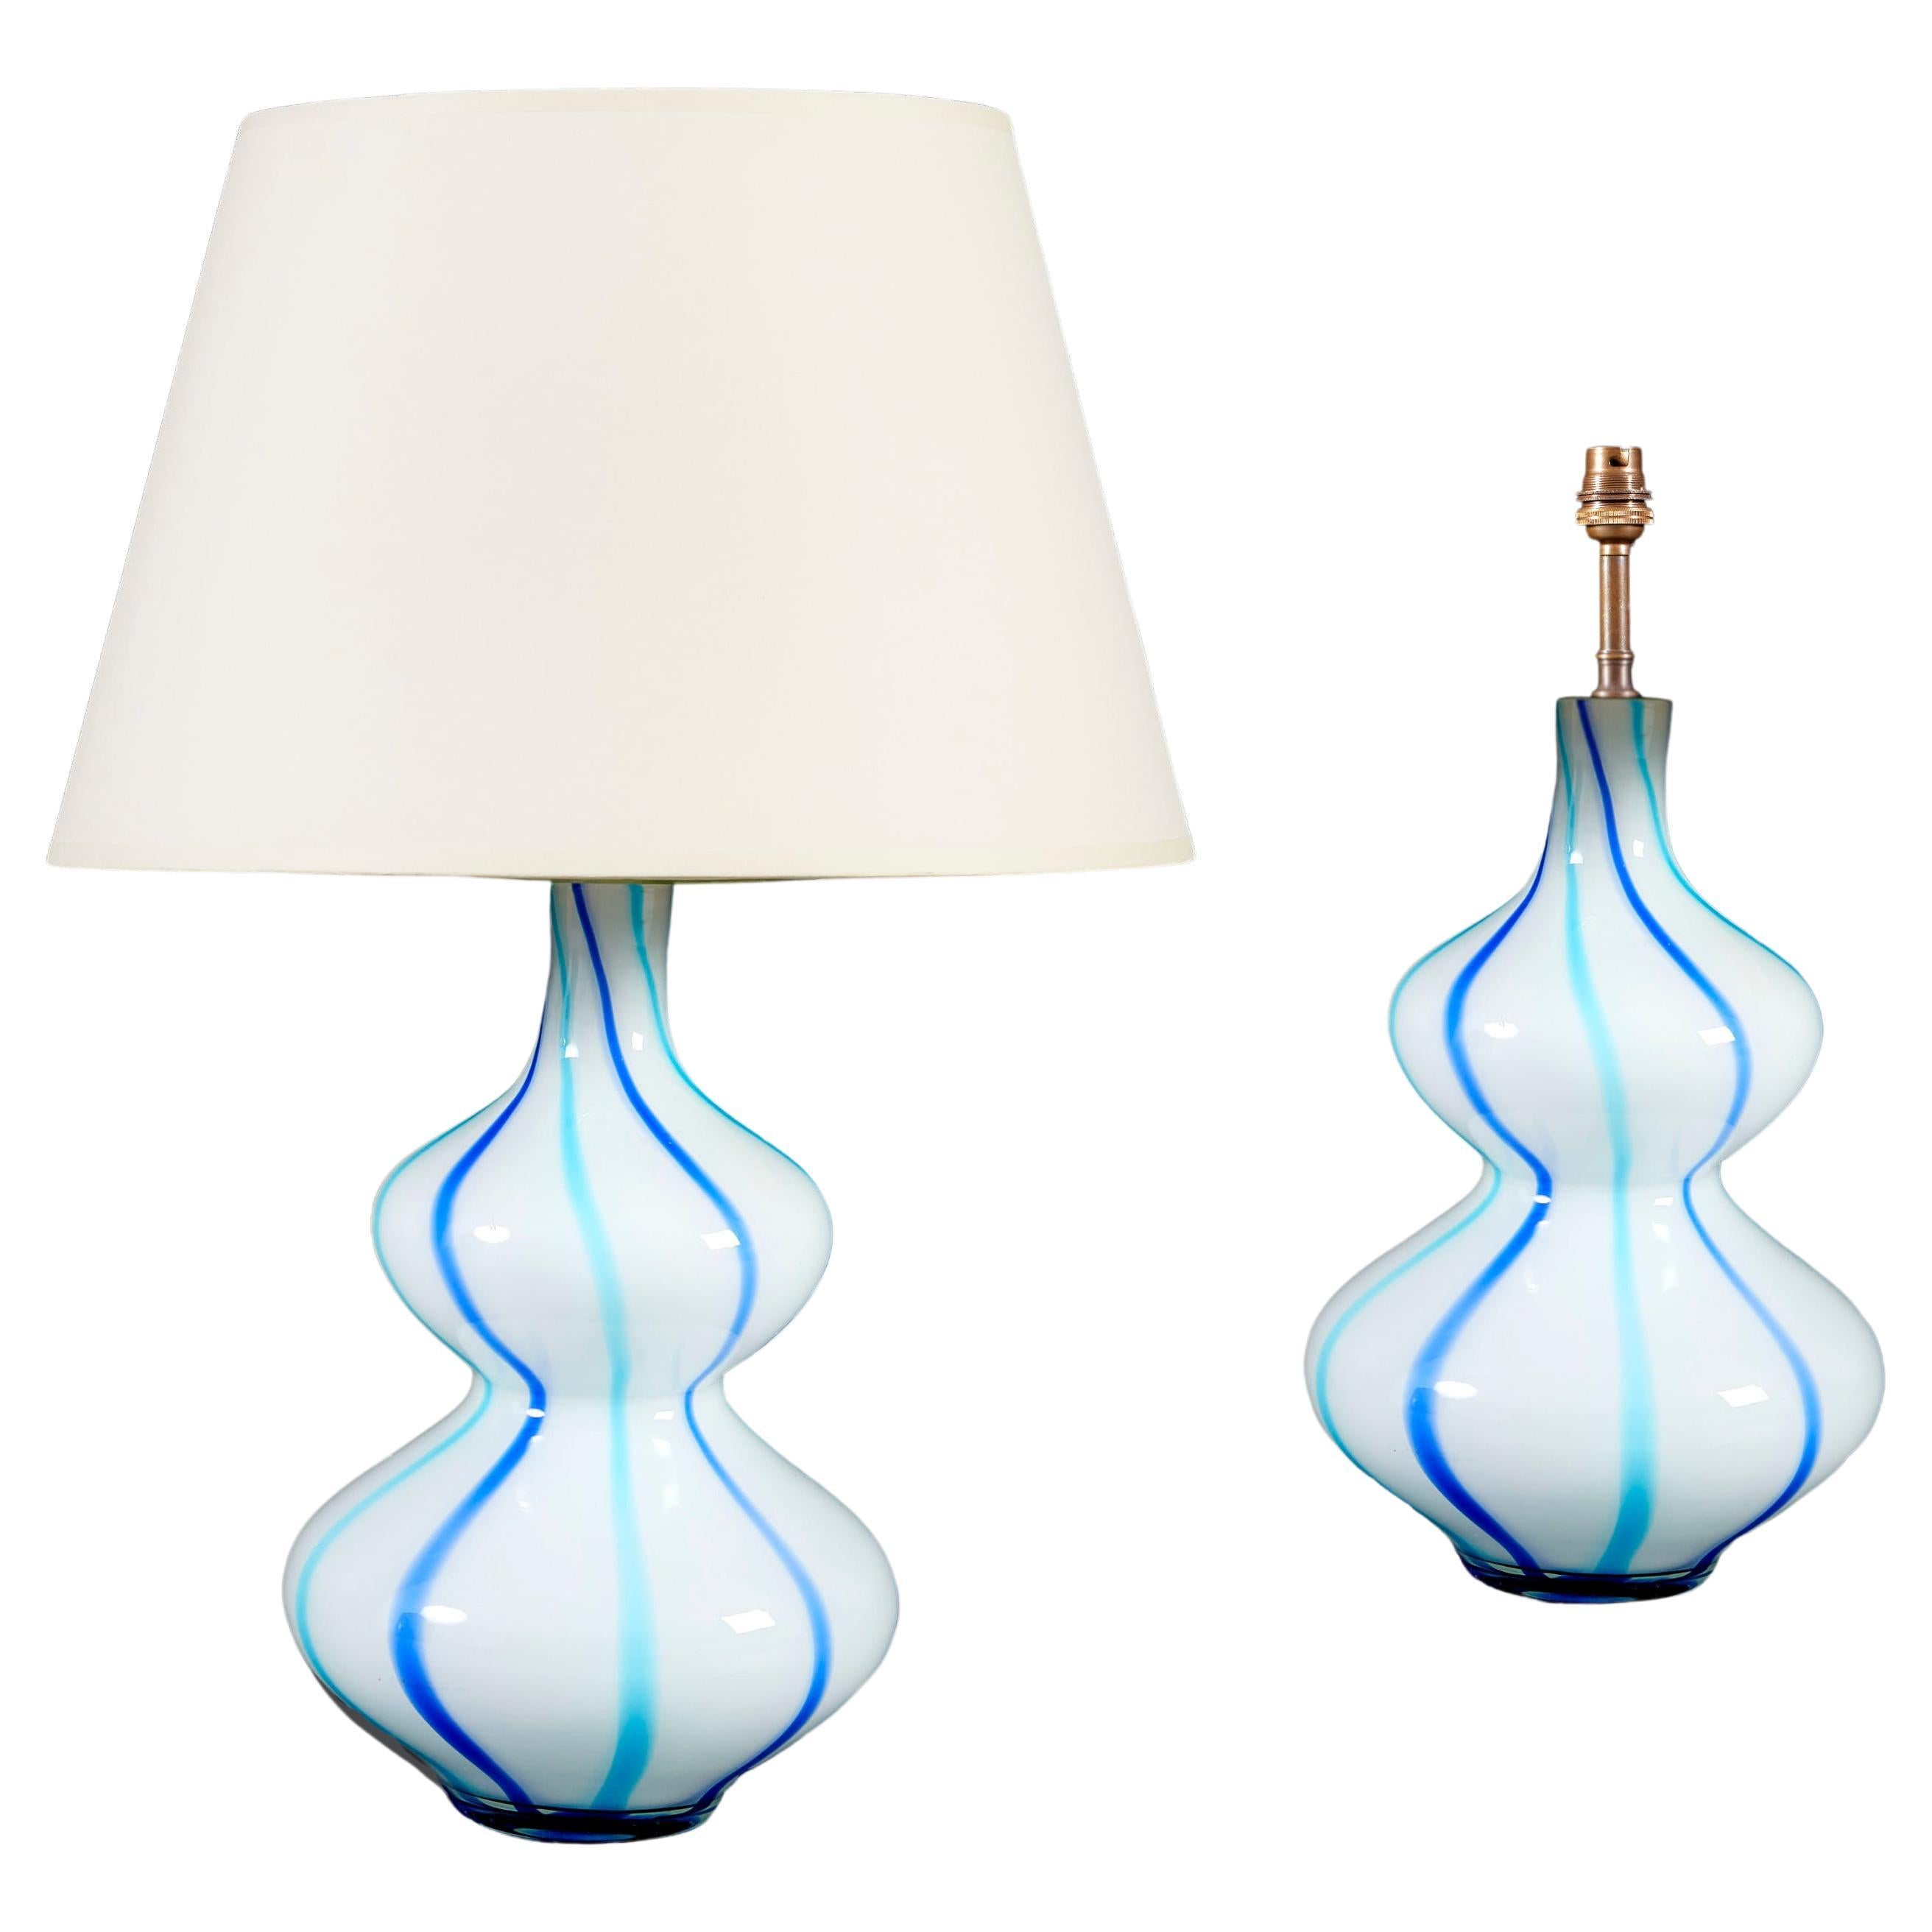 A Pair of Blue and White Stripe Double Gourd Murano Glass Vases as Table Lamps For Sale